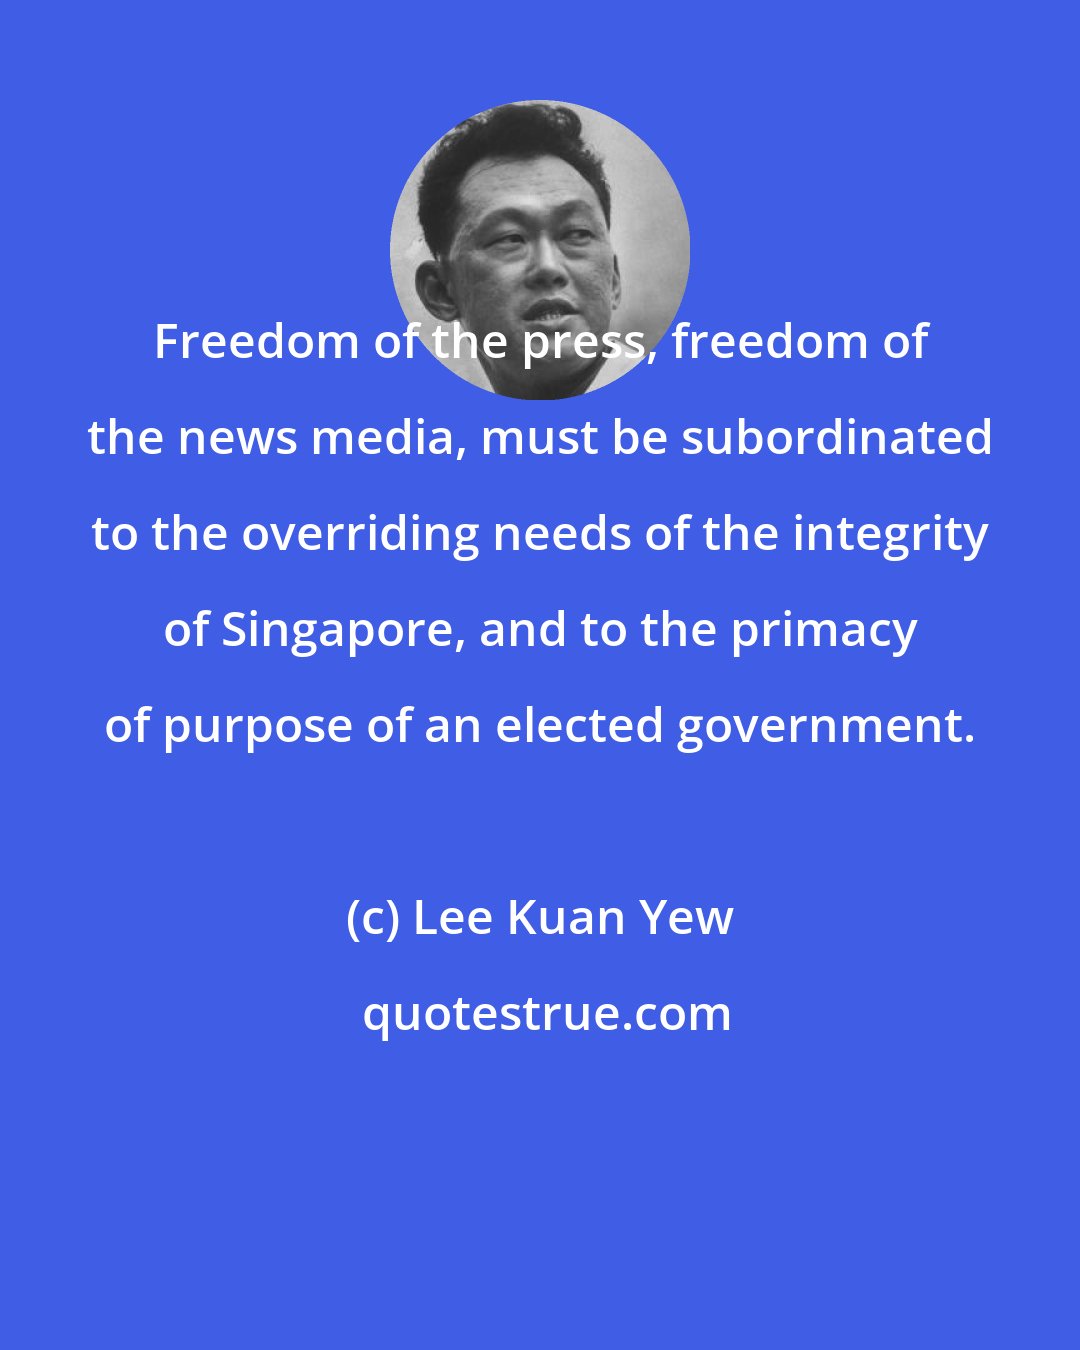 Lee Kuan Yew: Freedom of the press, freedom of the news media, must be subordinated to the overriding needs of the integrity of Singapore, and to the primacy of purpose of an elected government.